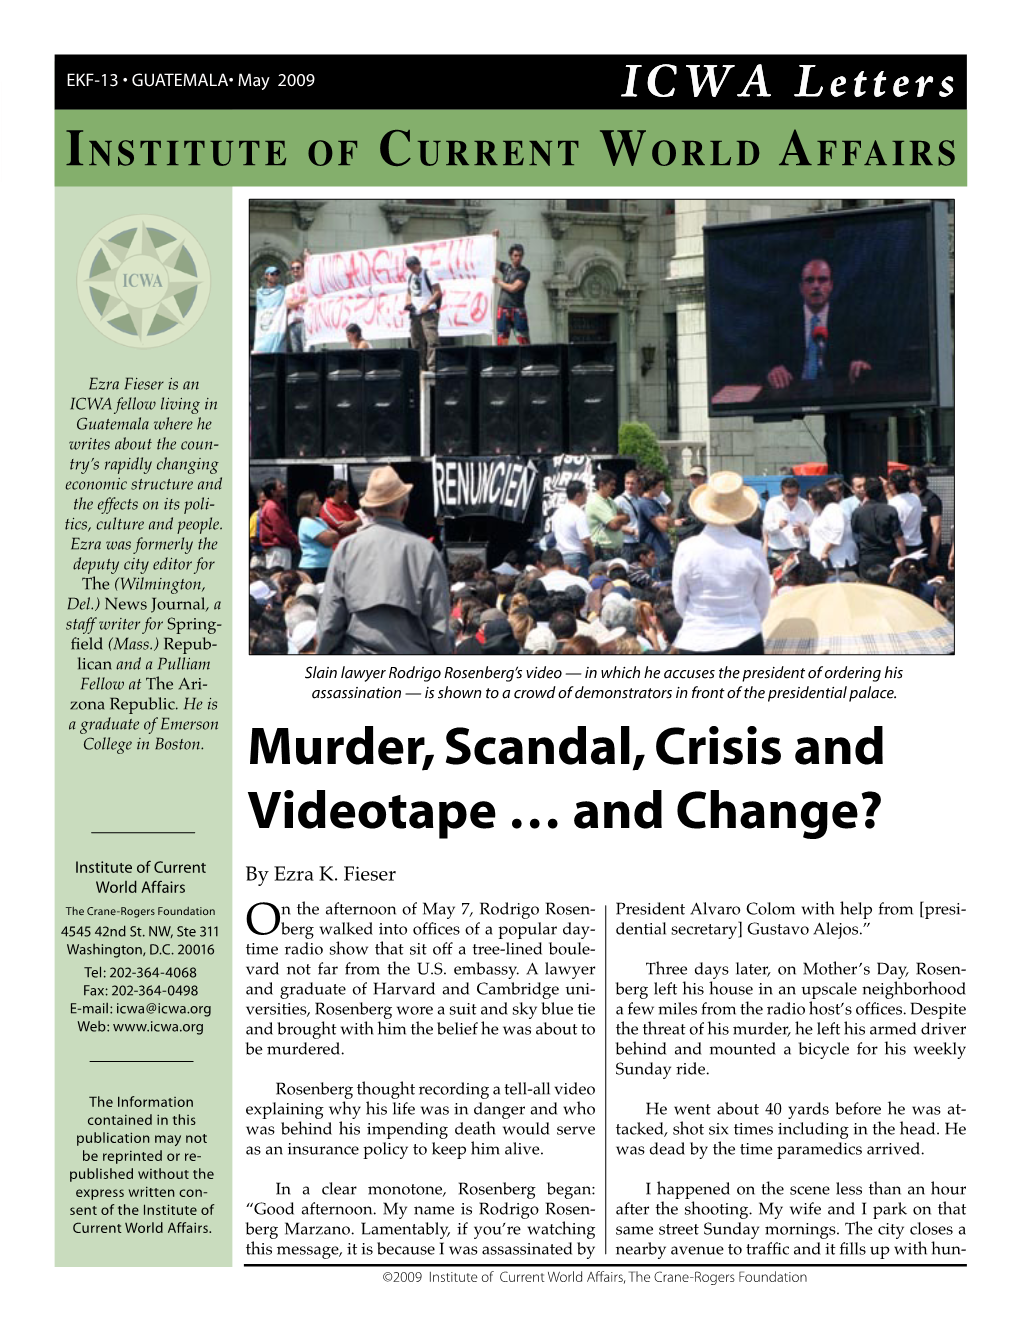 Murder, Scandal, Crisis and Videotape … and Change?